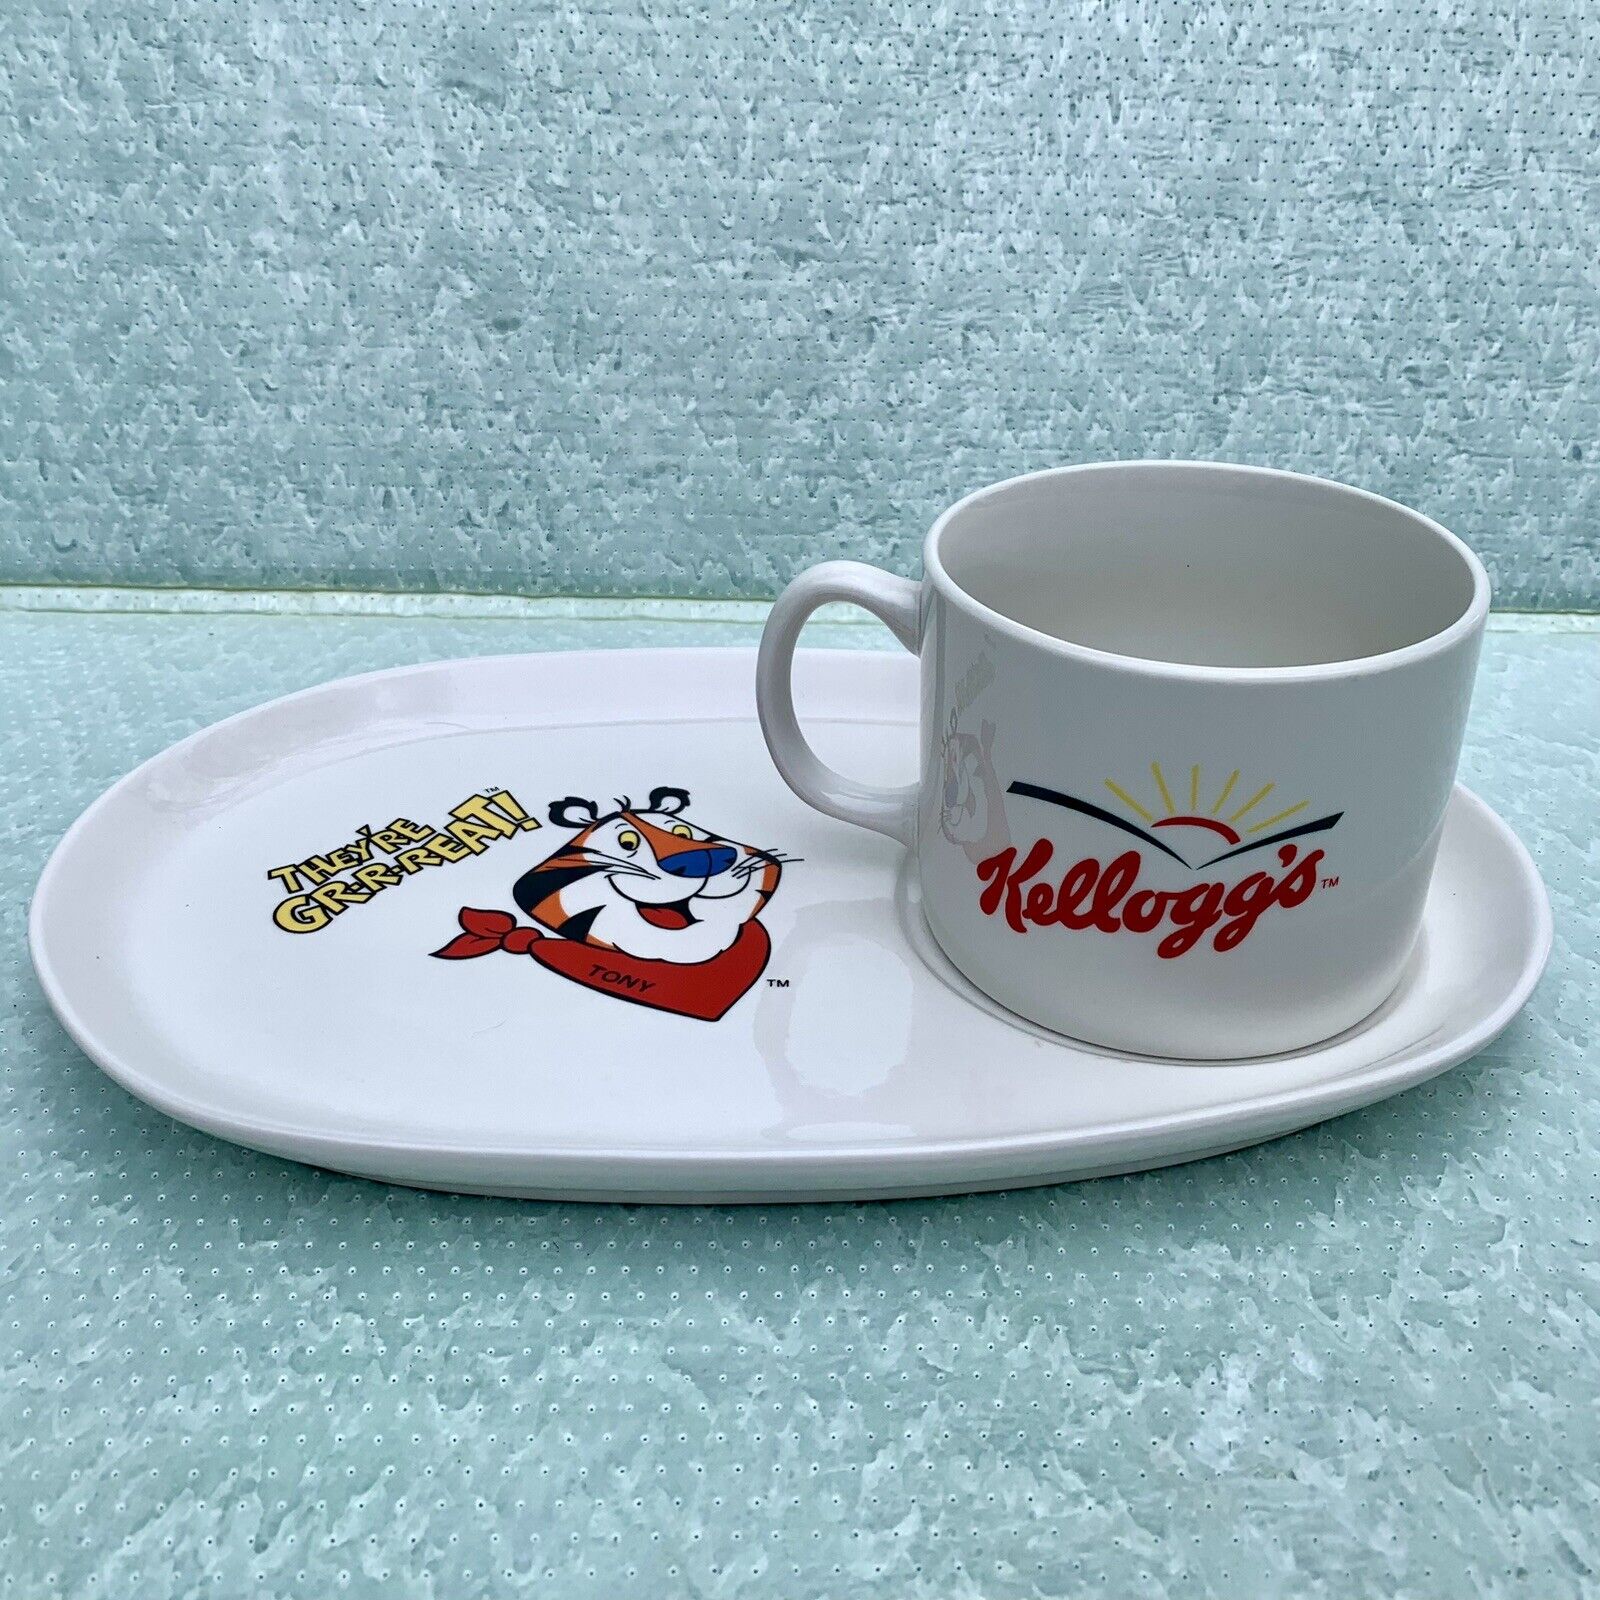 Kellogg's Tony the Tiger Ceramic Platter Plate Cereal Cup They’re G-r-r-reat 